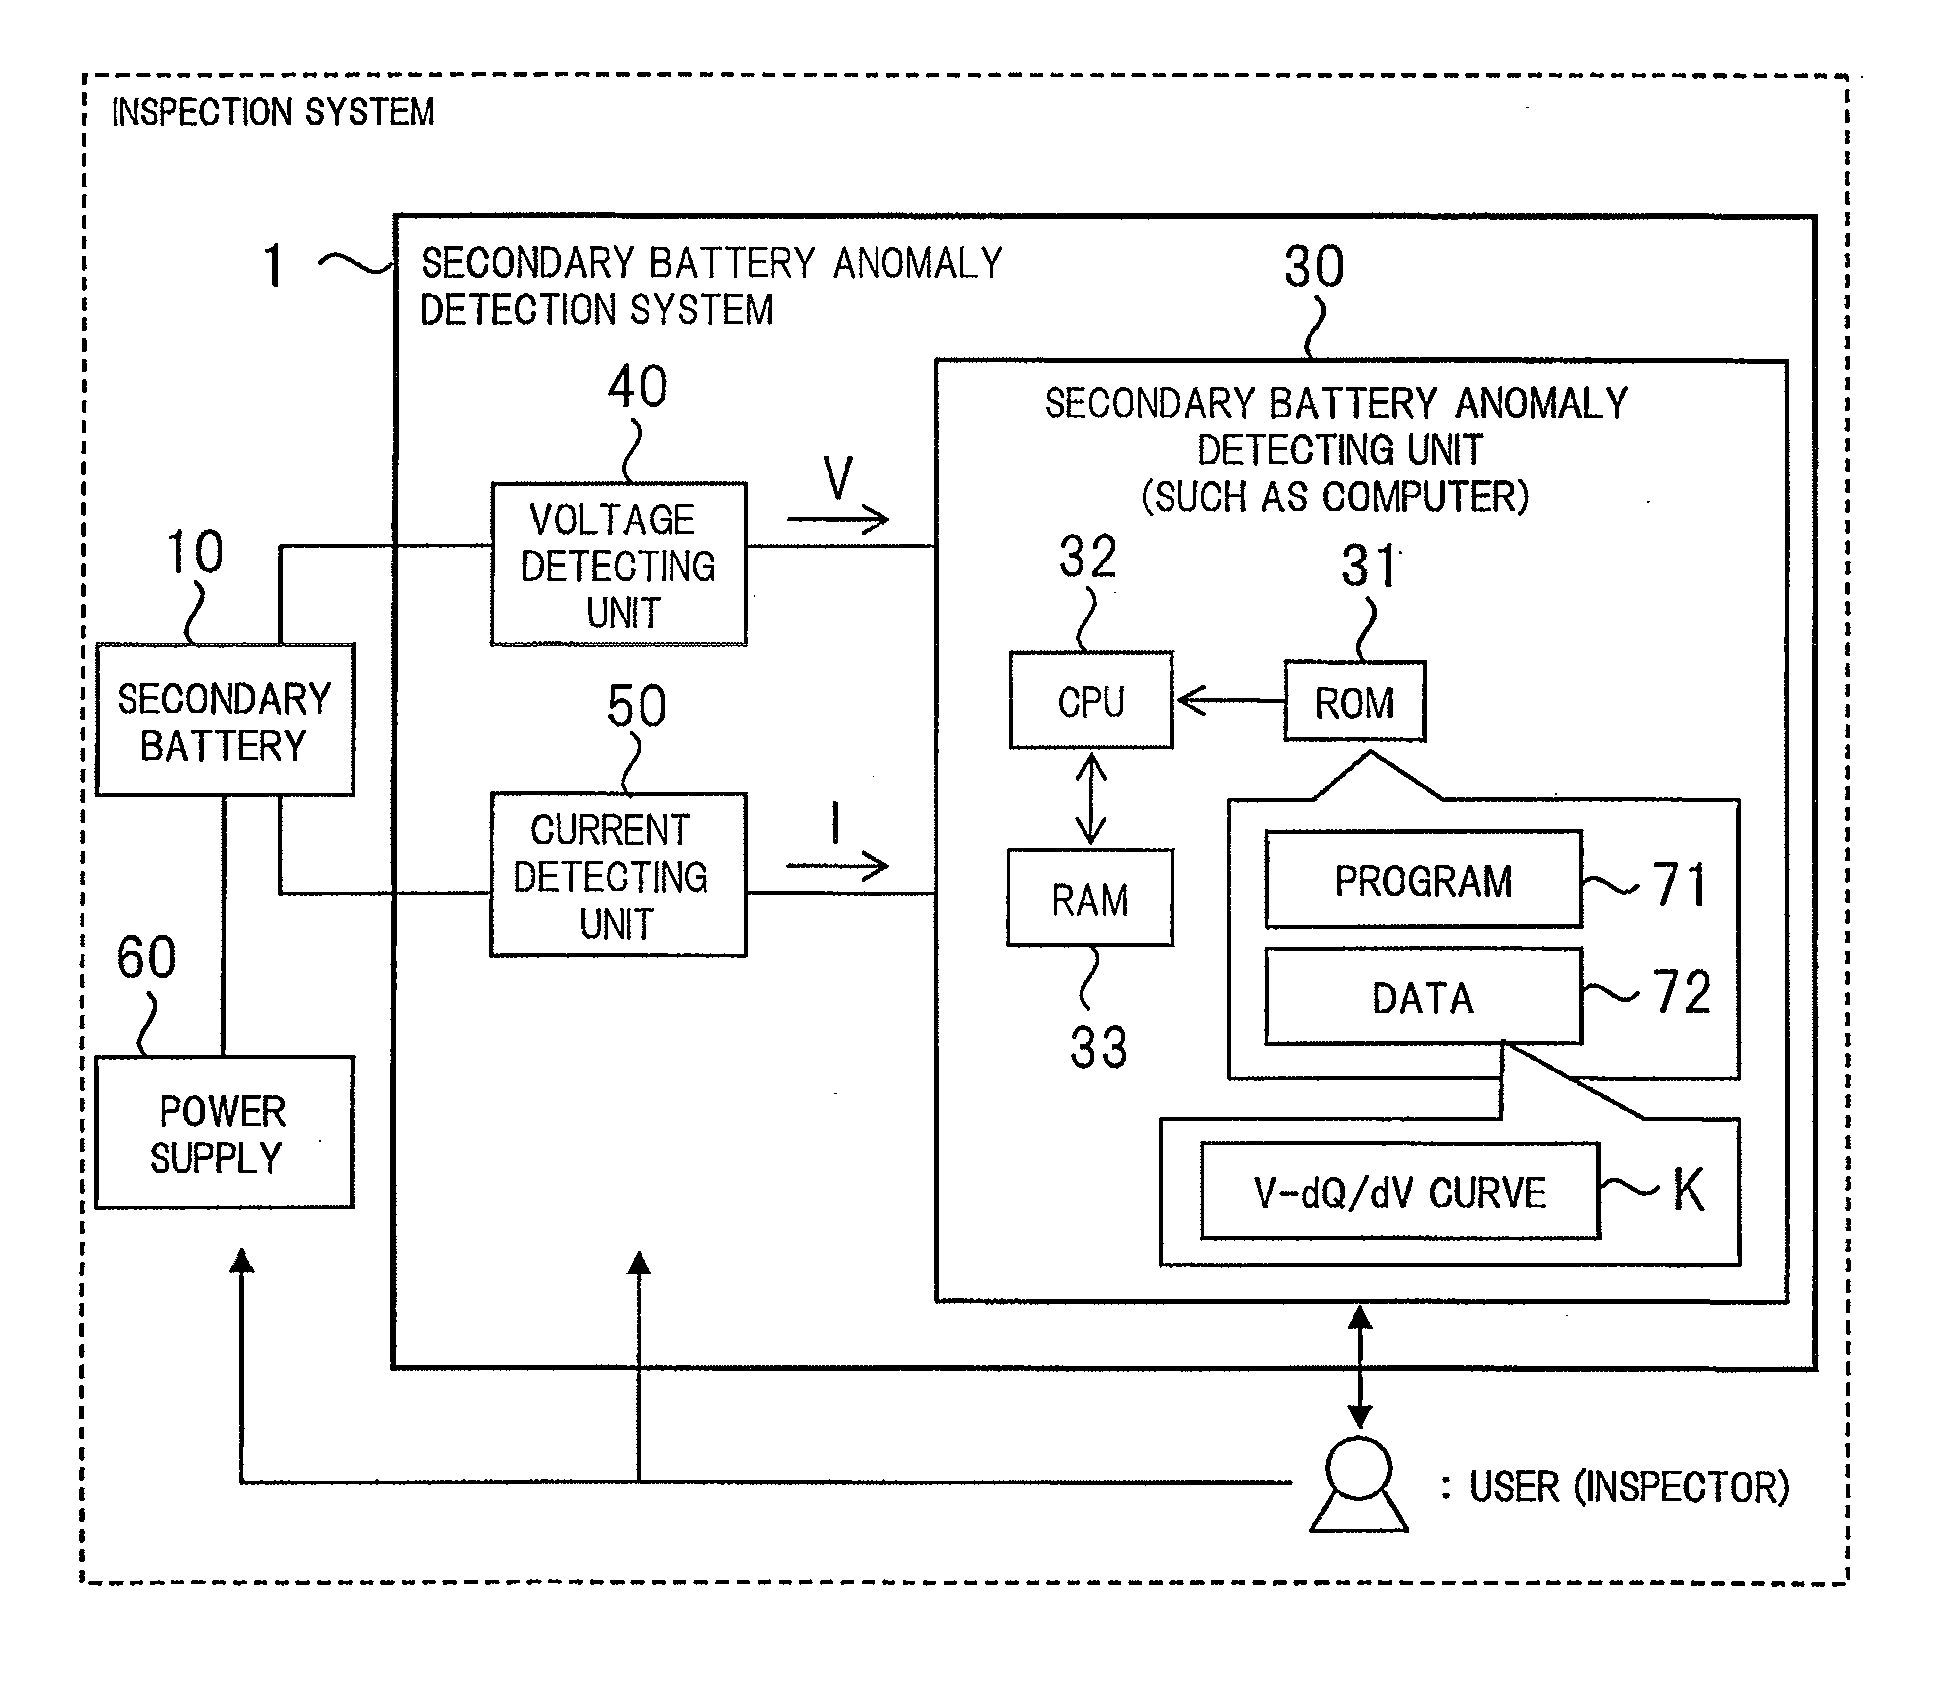 Inspection System, Charger/Discharger, and Inspection Method of Secondary Battery